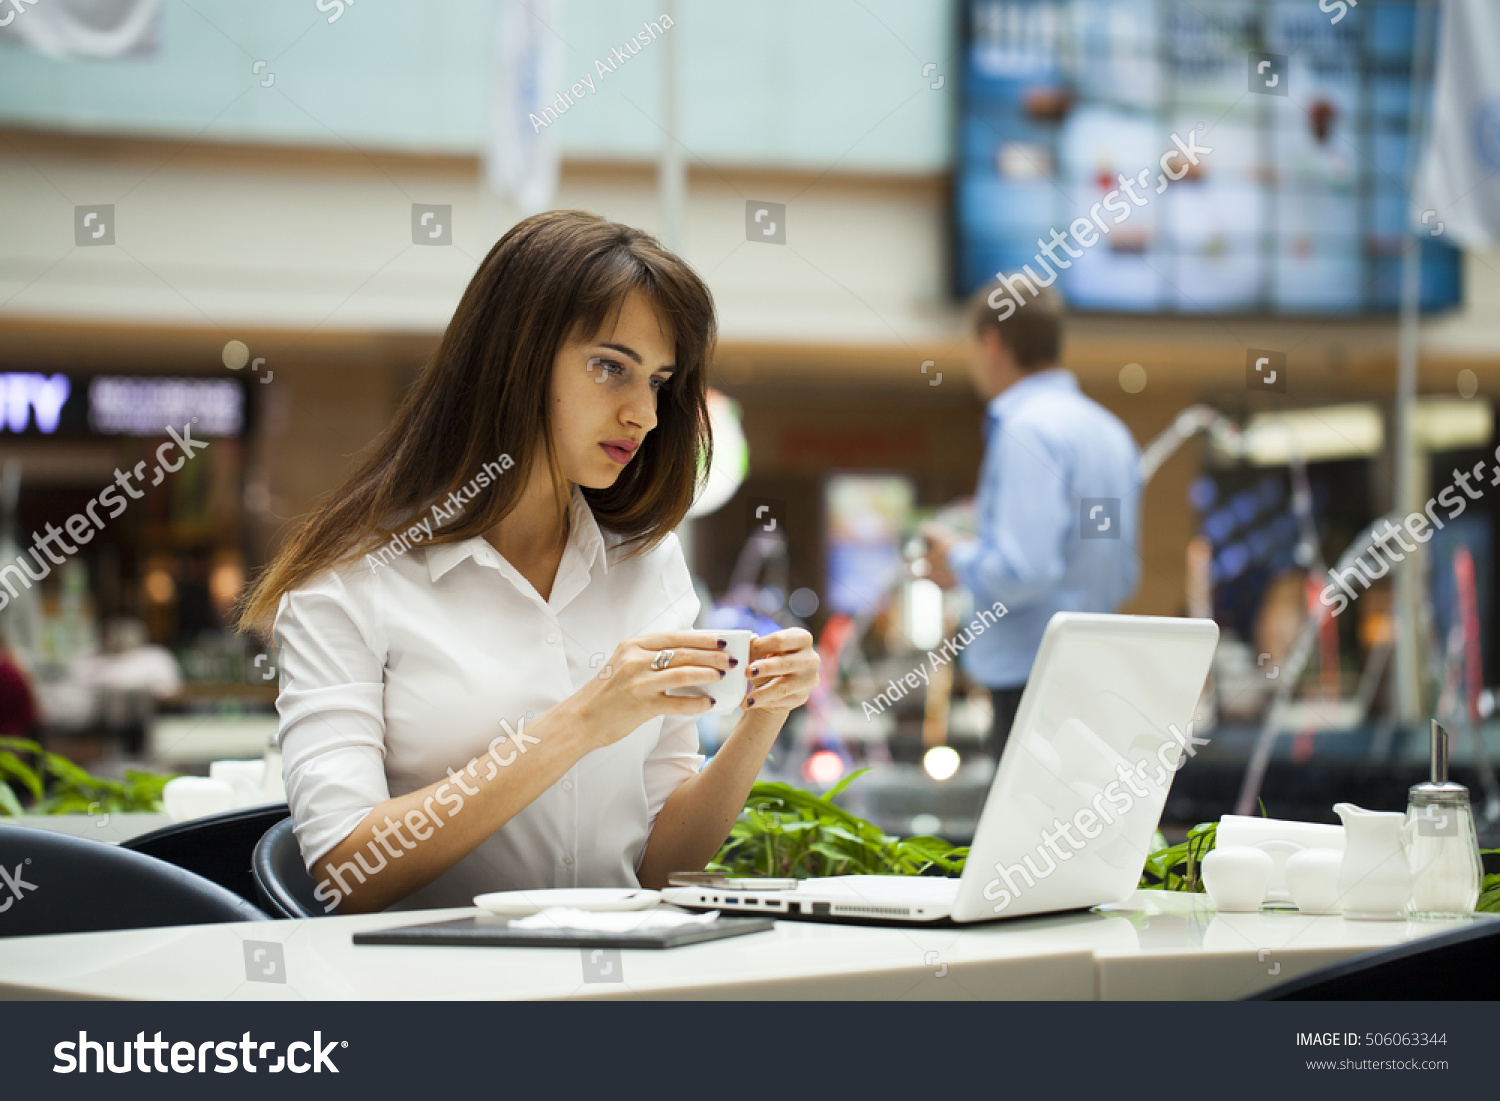 Young beautiful business woman drinking coffee while sitting in a restaurant #506063344